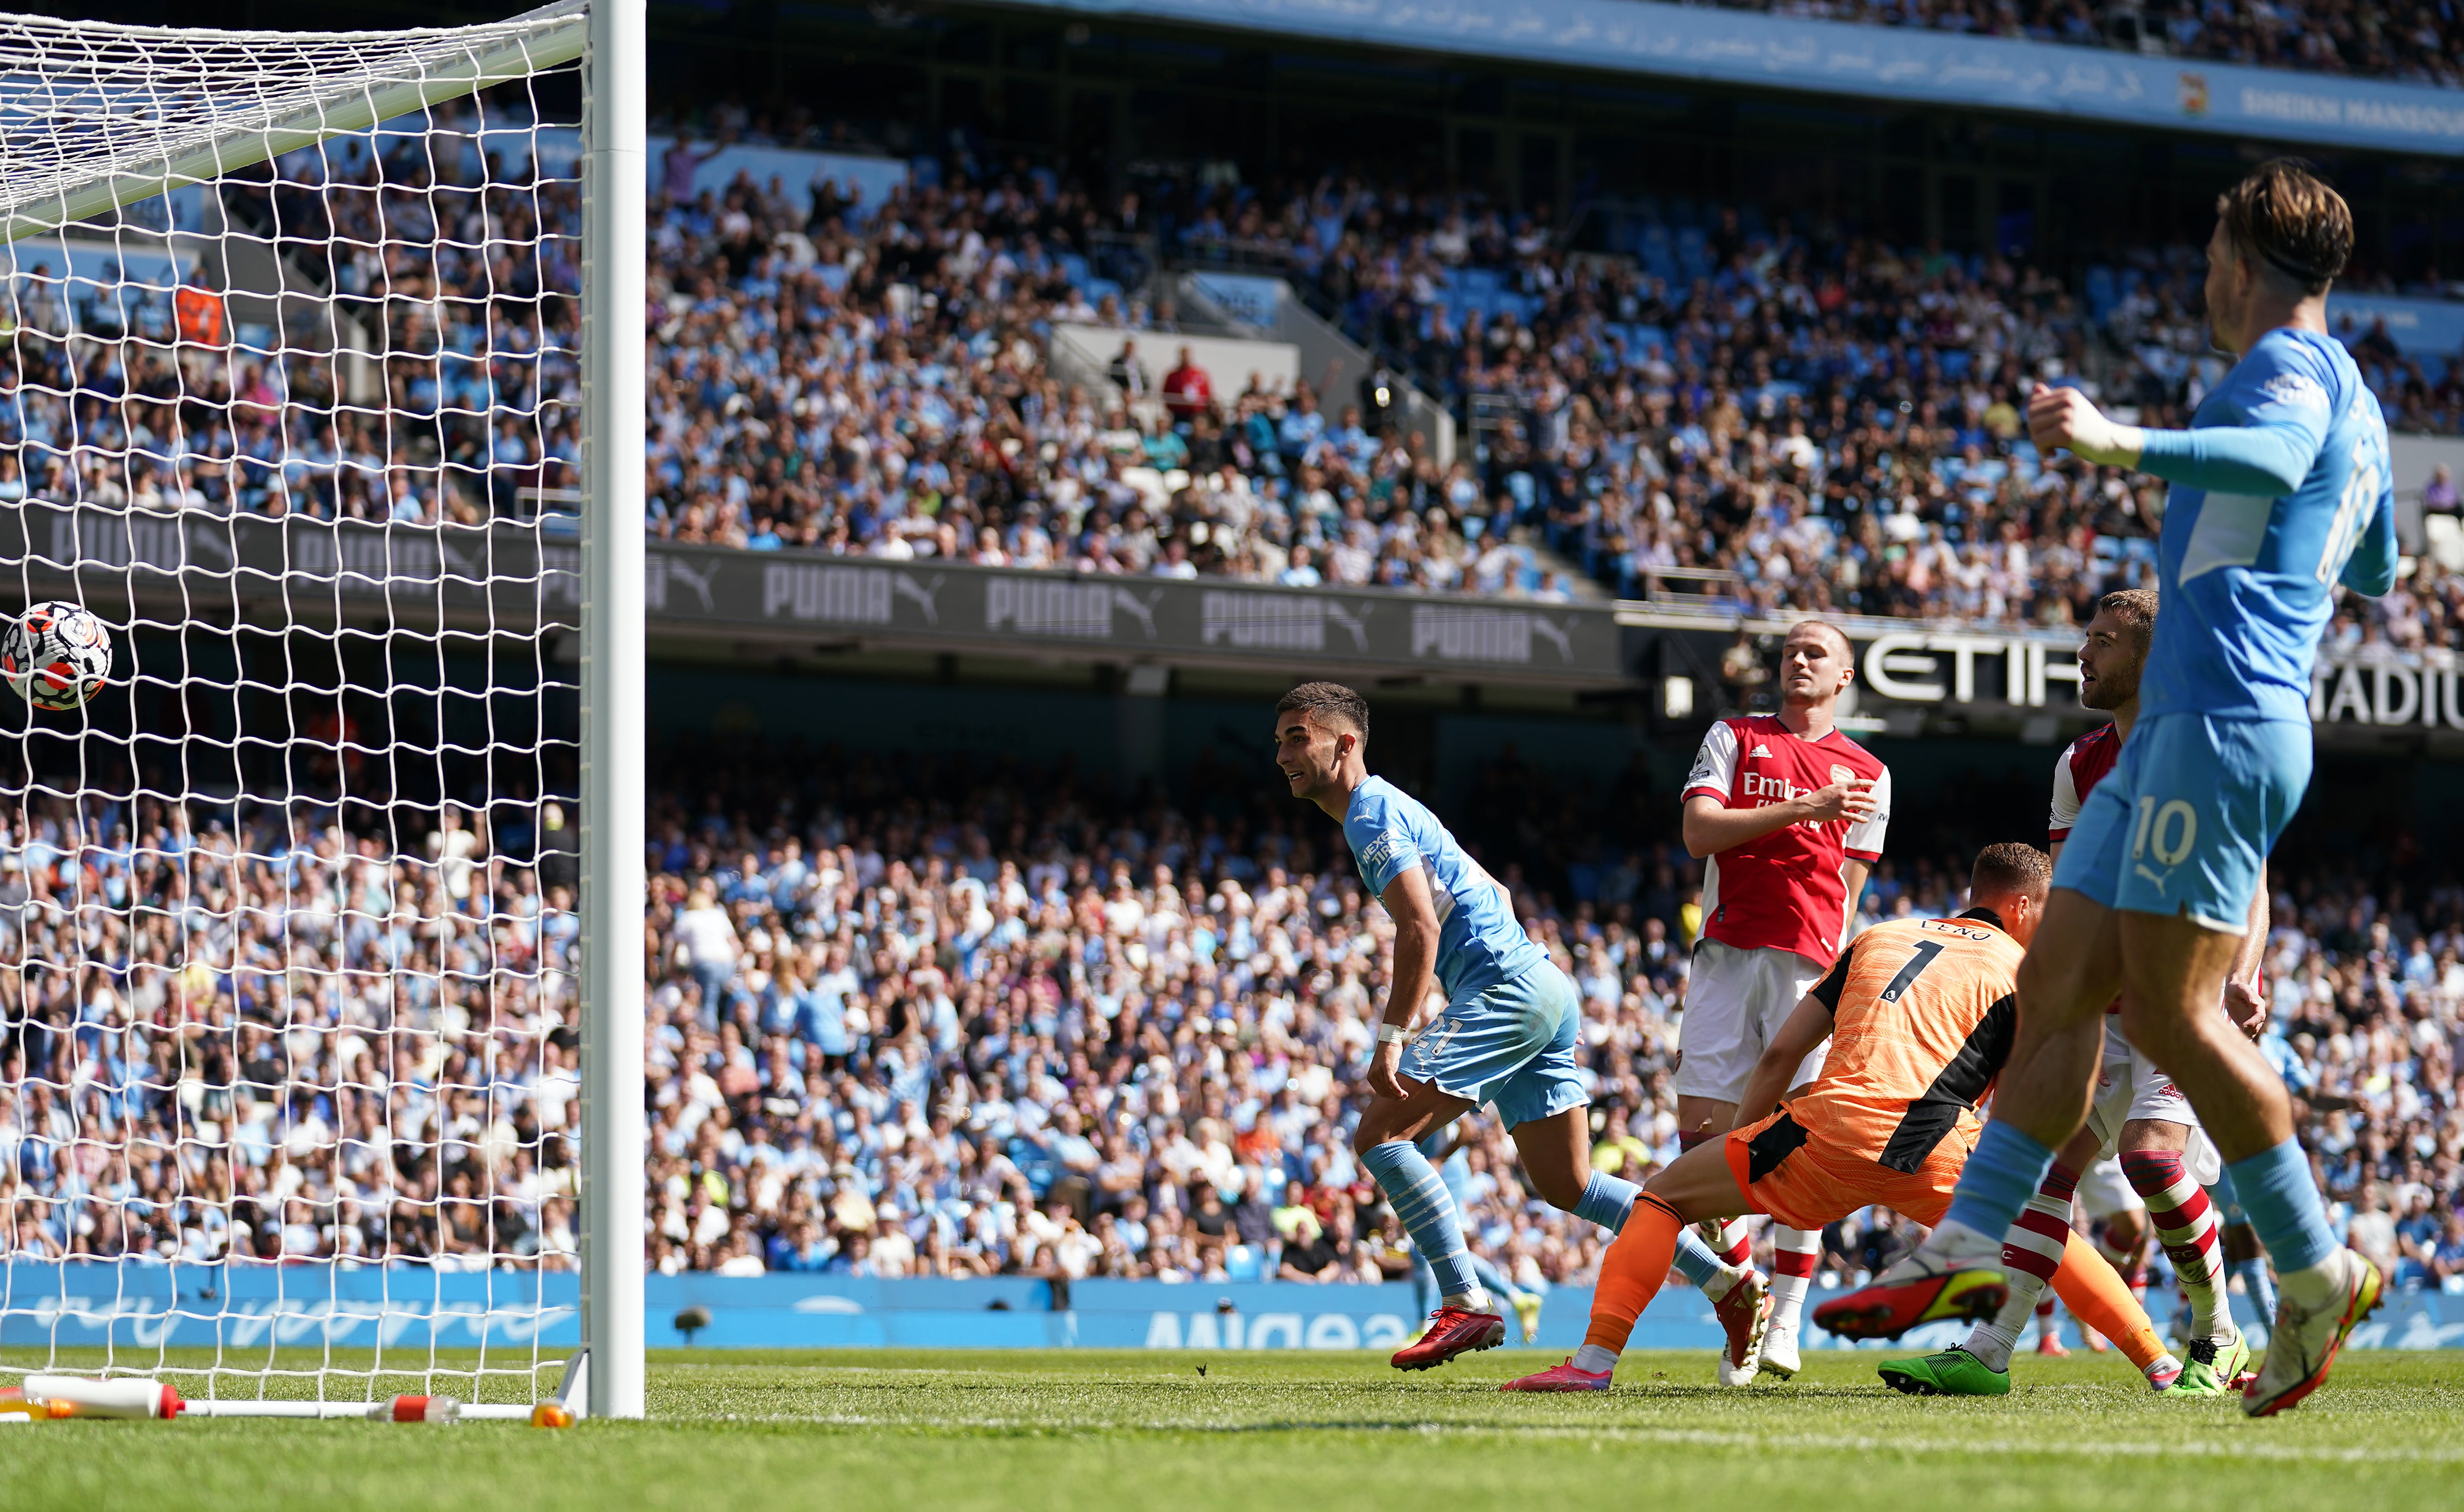 Ferran Torres scores Manchester City’s fifth goal in their 5-0 rout of Arsenal (Nick Potts/PA)